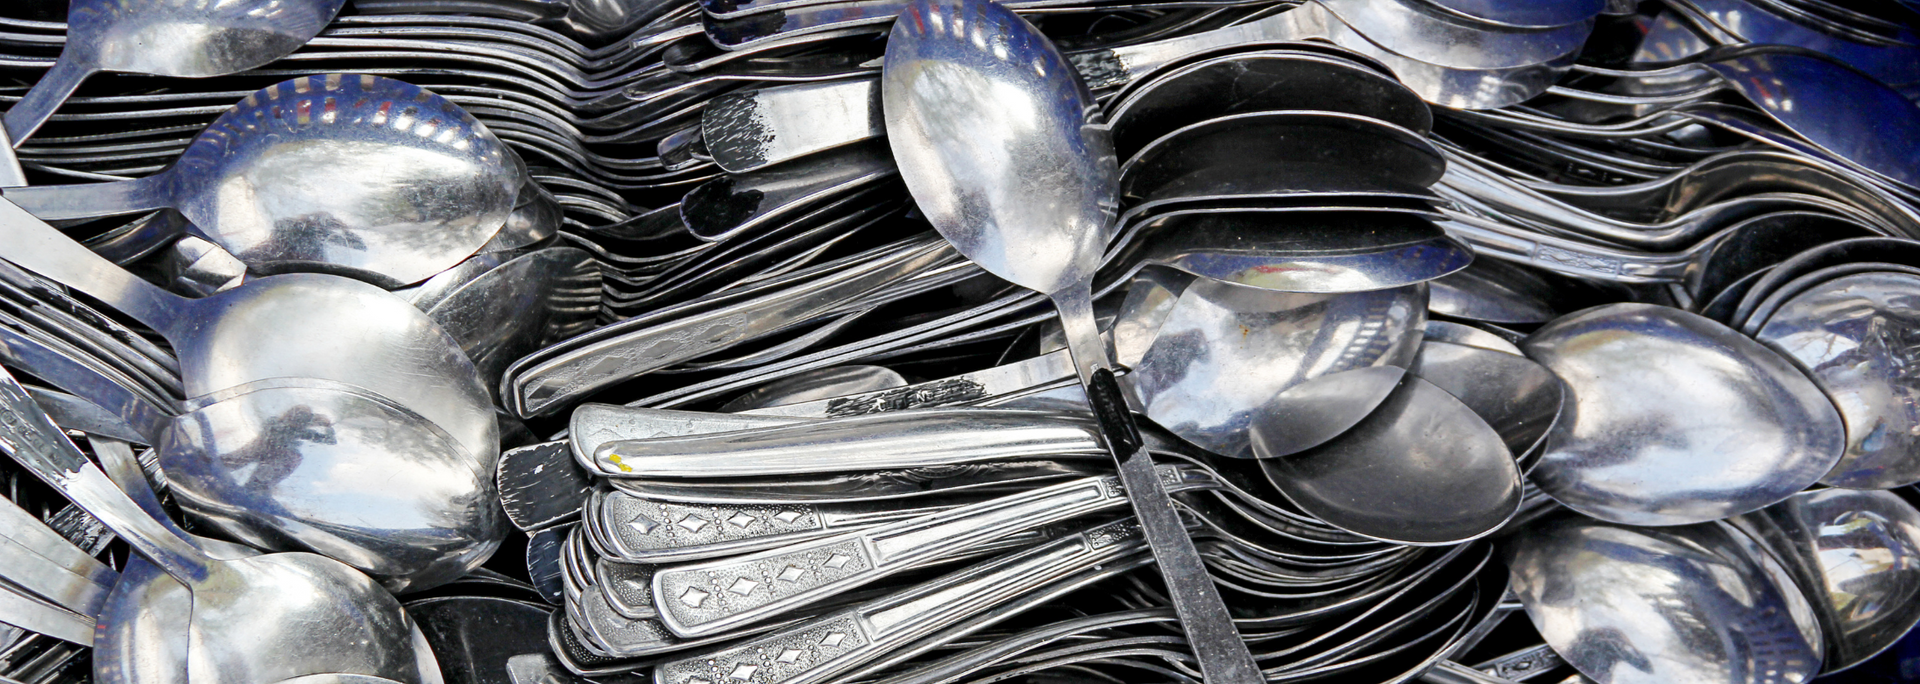 Picture of many spoons